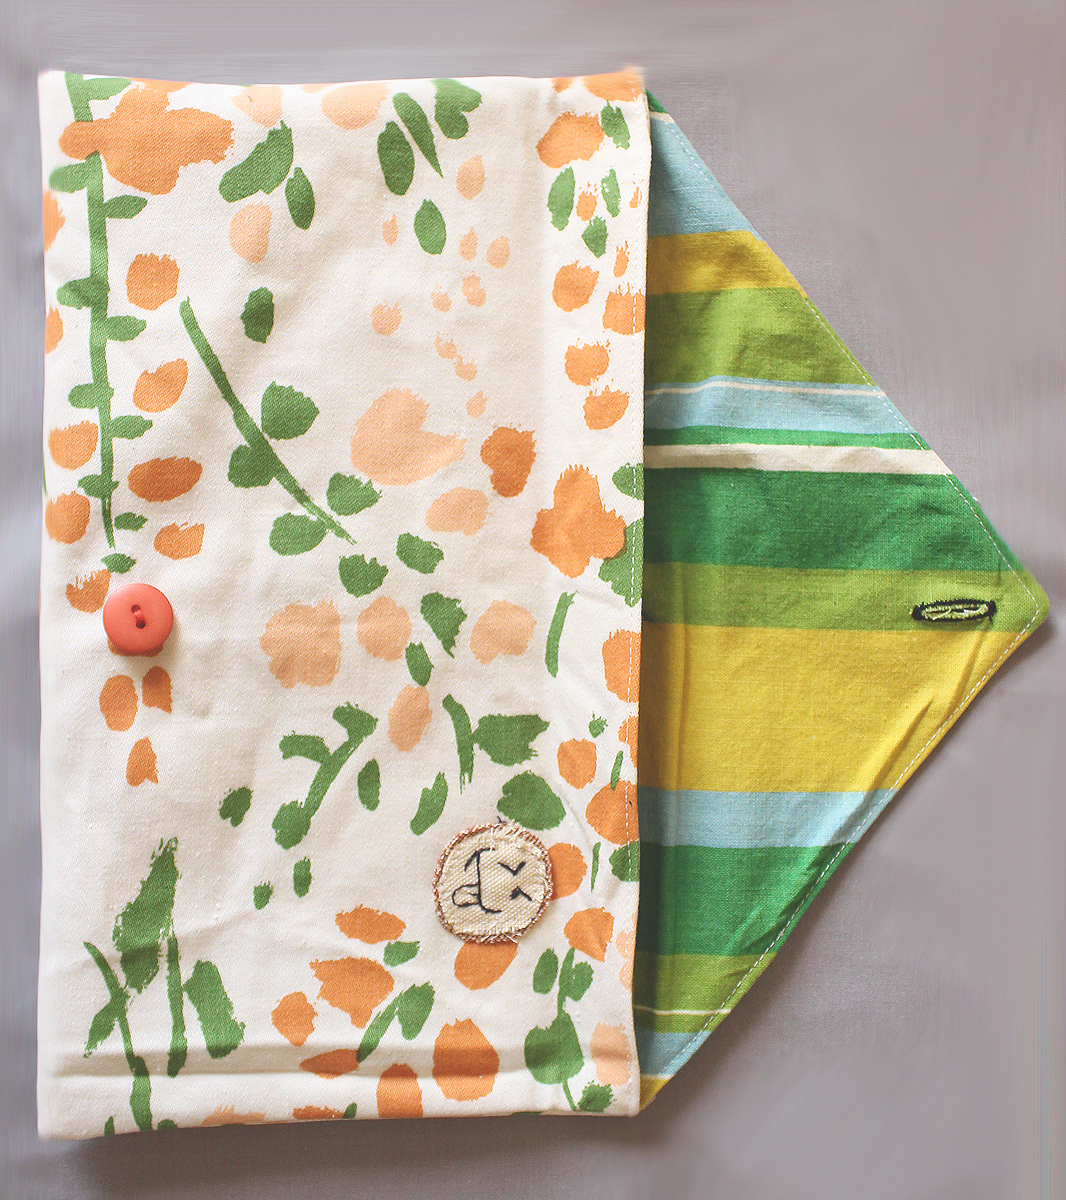 Envelope Clutch, Makeup Bag, Gifts For Her In Orange And Green Floral Fabric